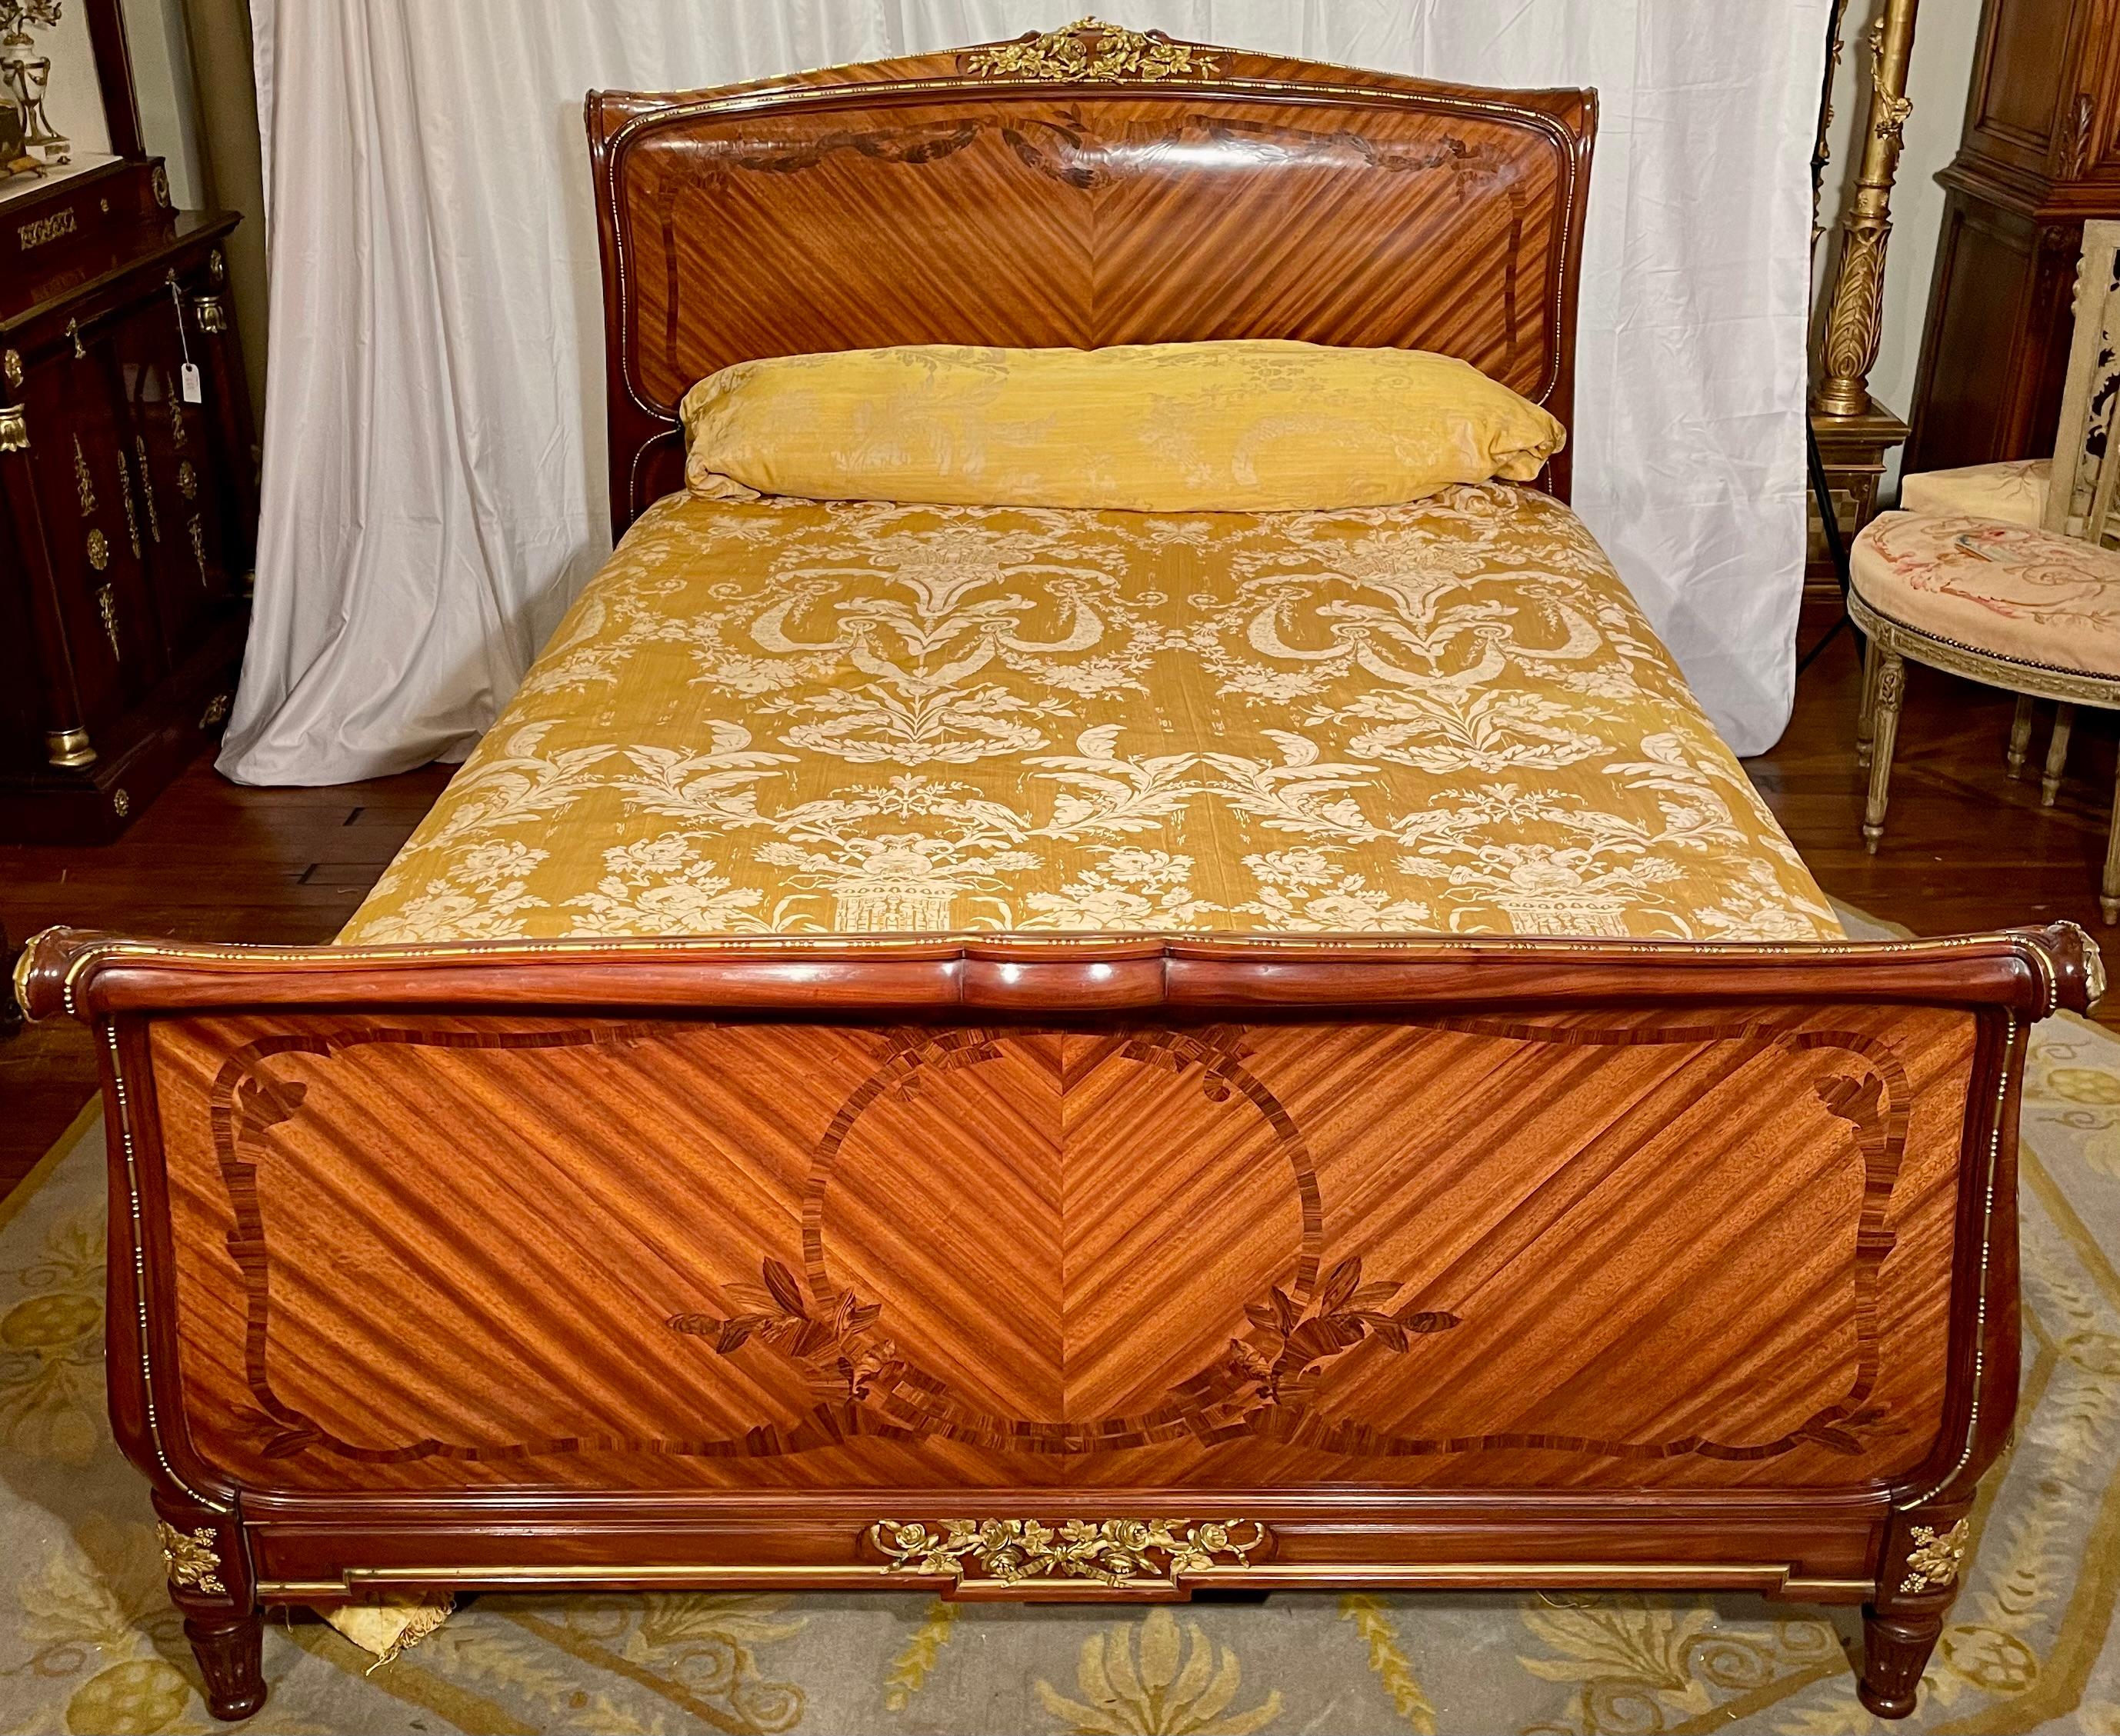 Antique French kingwood bronze d'ore queen size bed, signed 